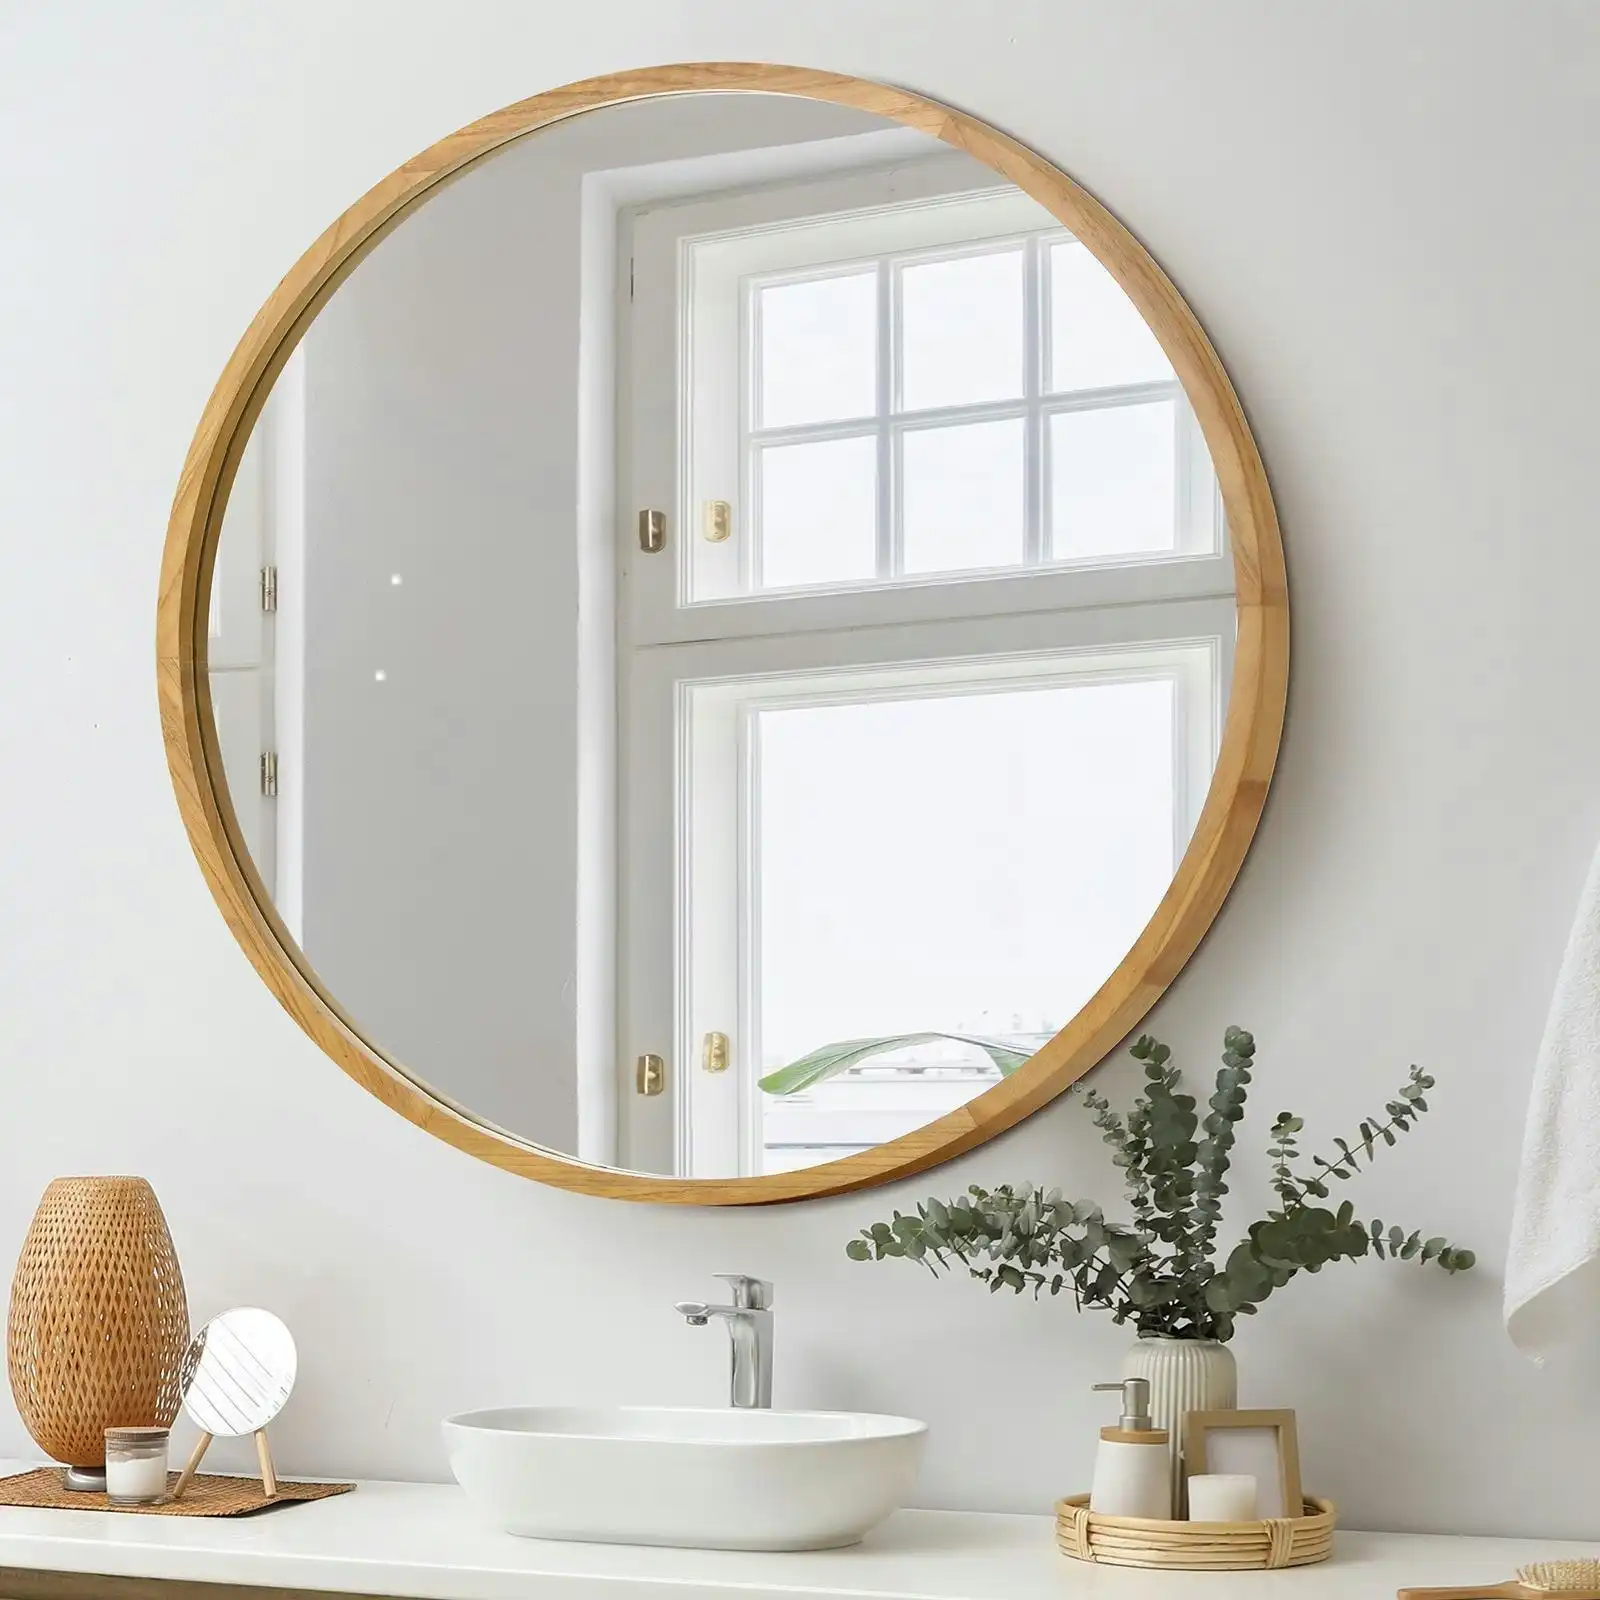 Oikiture Wall Mirrors Round Large Makeup Mirror Vanity Home Decro 90cm Wooden